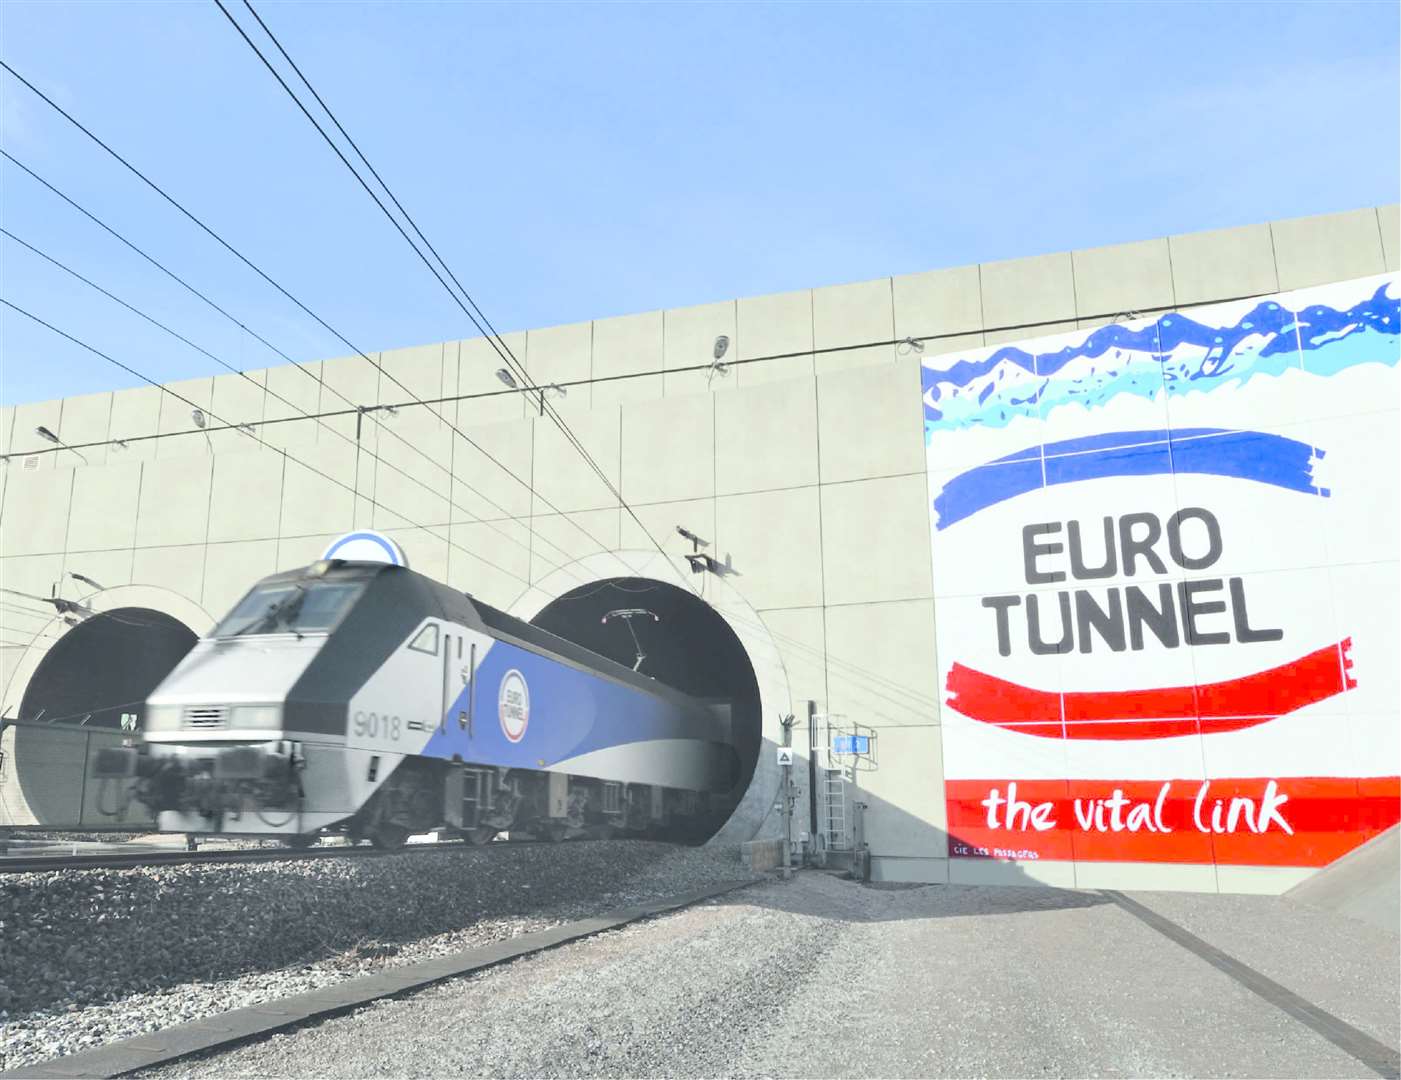 Mr Shapps said the multimillion pound package,, which also covers Eurotunnel, comes after a trilateral agreement with France and Ireland